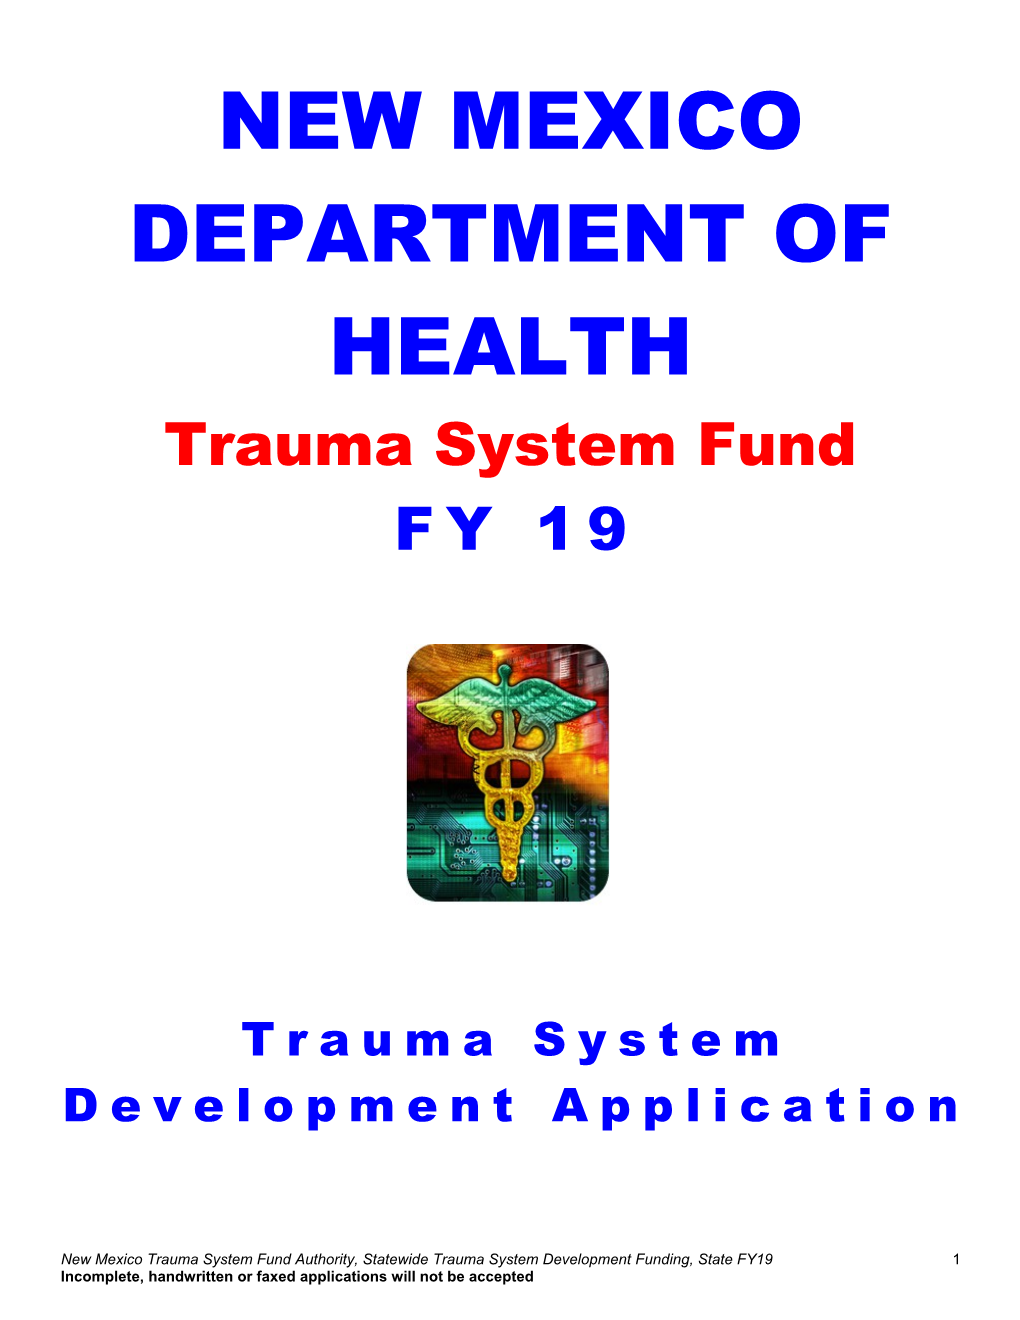 New Mexico Department of Health Trauma System Fund Application